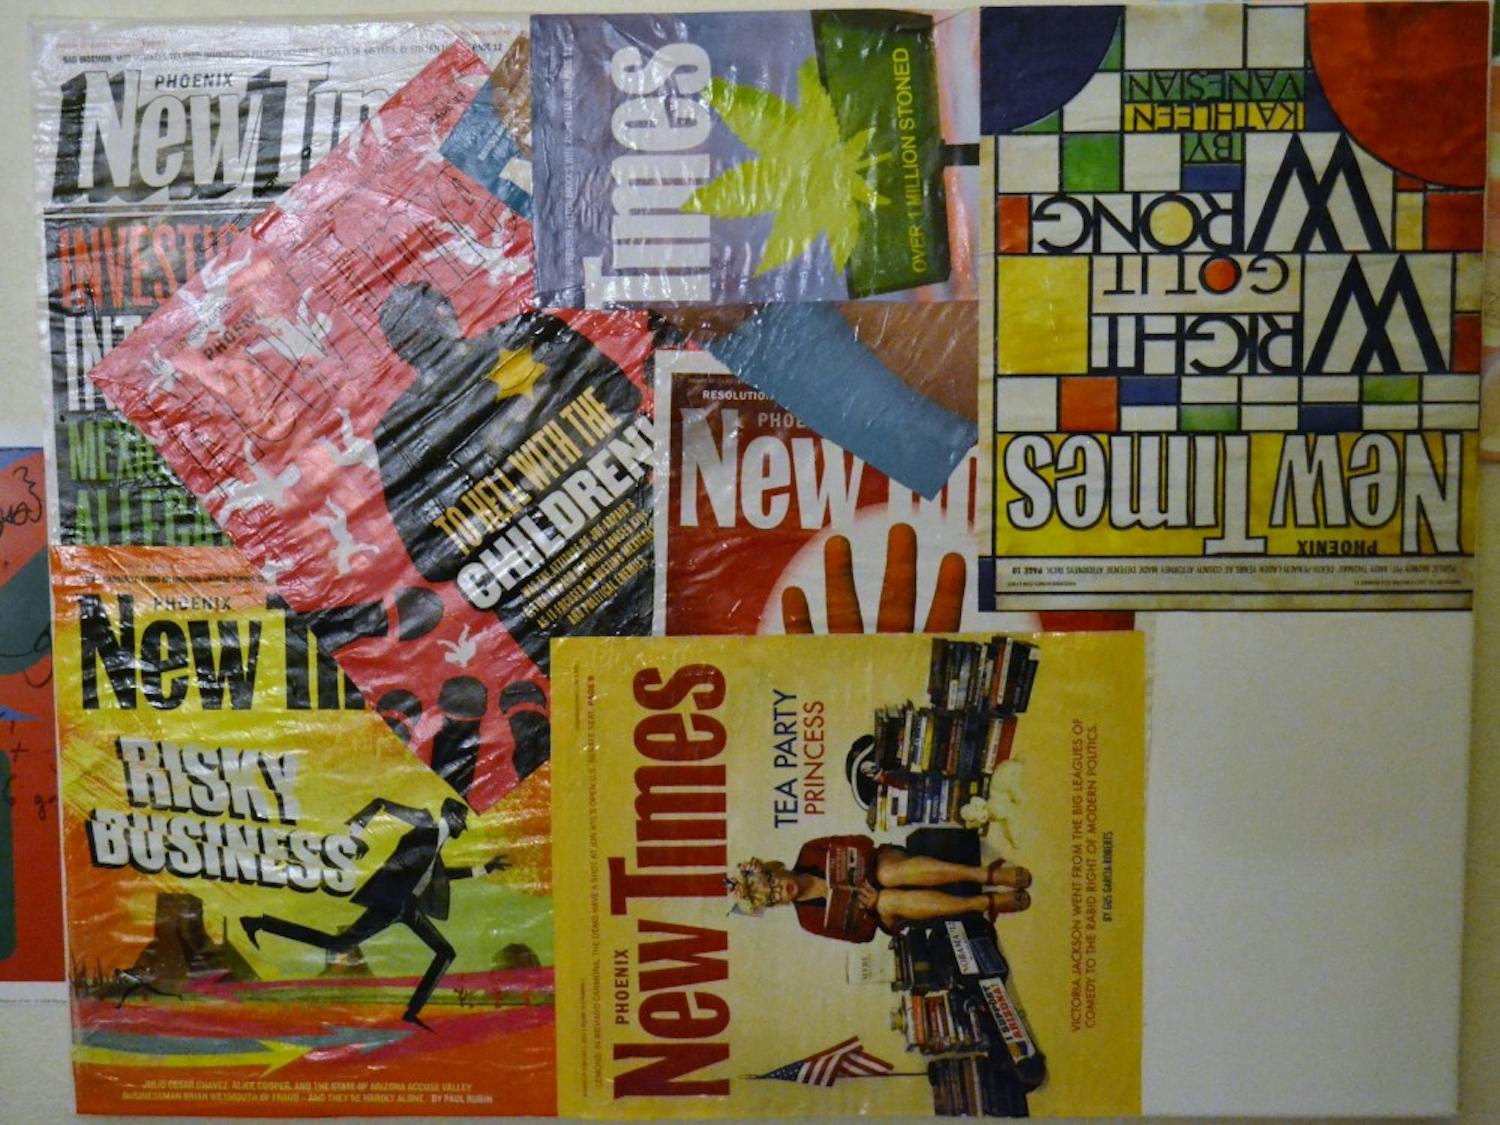 My in progress collage using the covers from the Phoenix New Times. Photo by Faith Breisblatt.